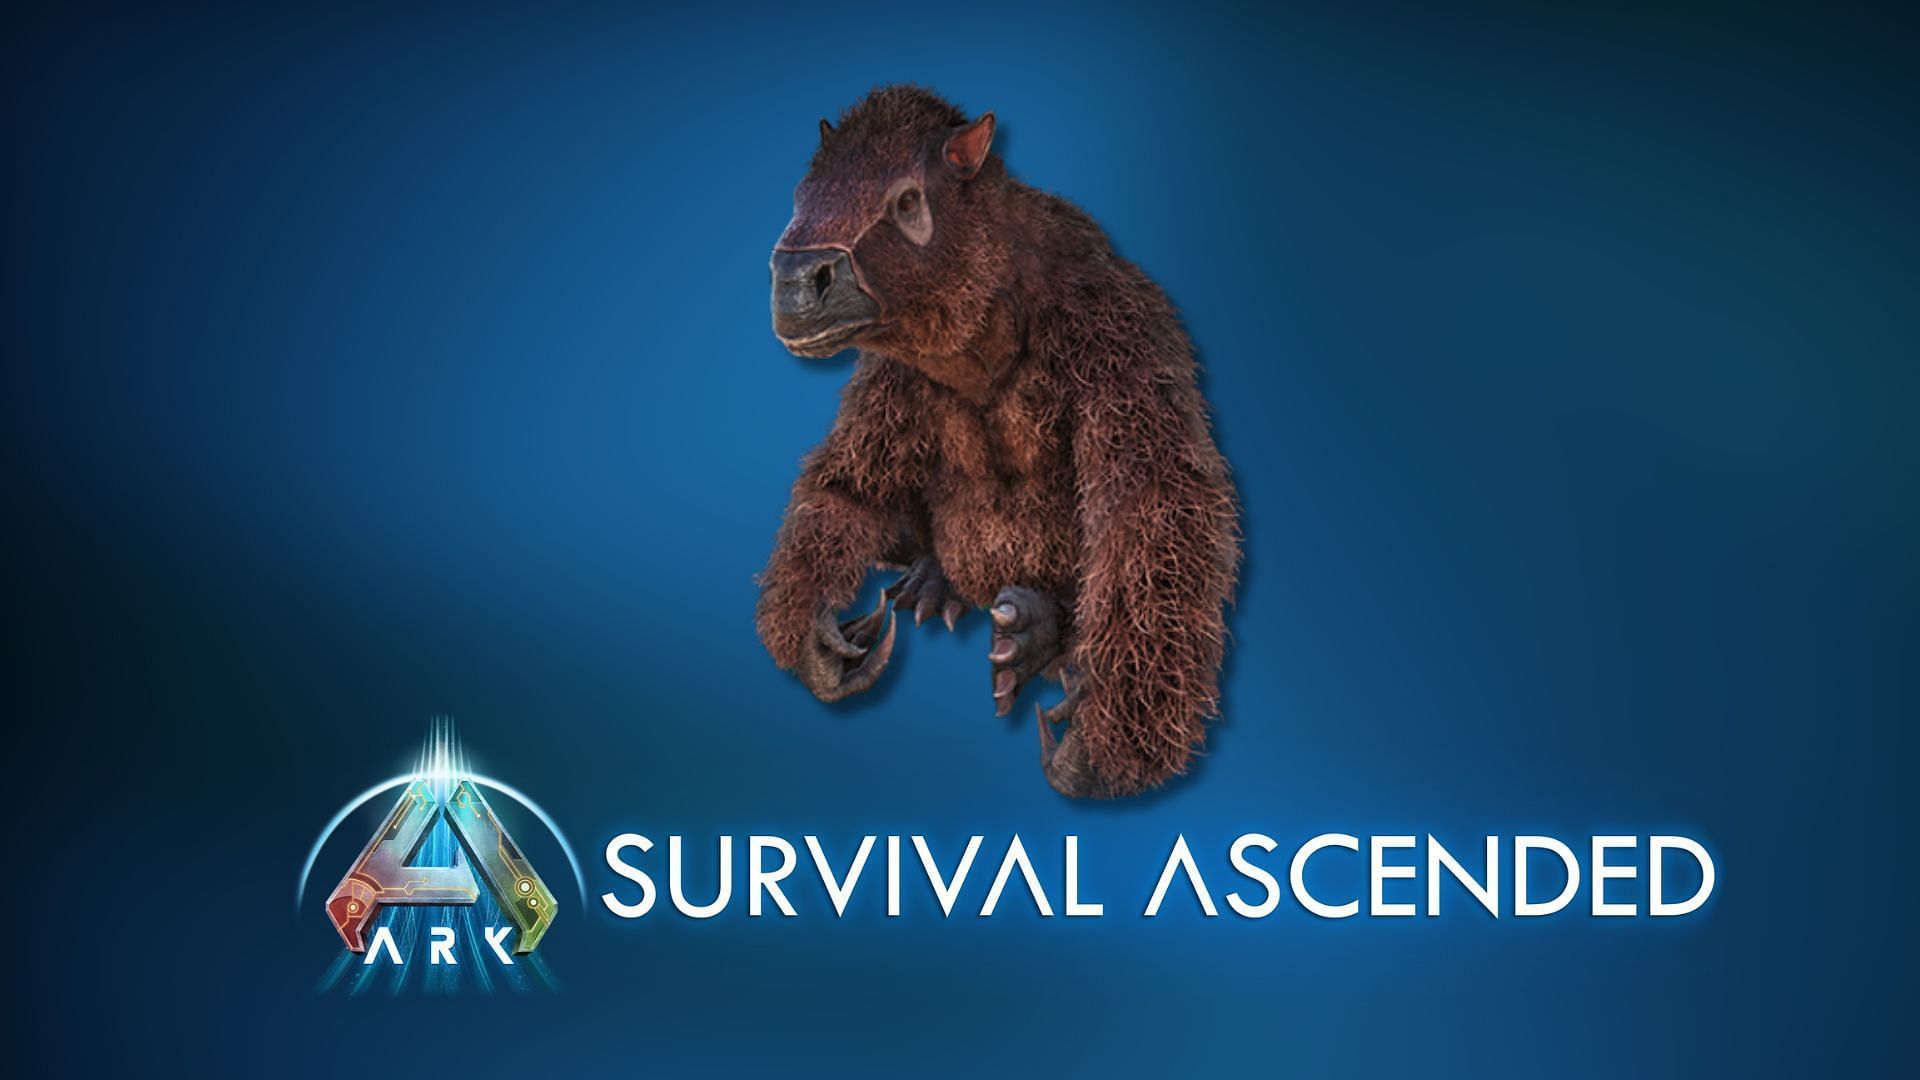 How  to tame a Megatherium in Ark Survival Ascended